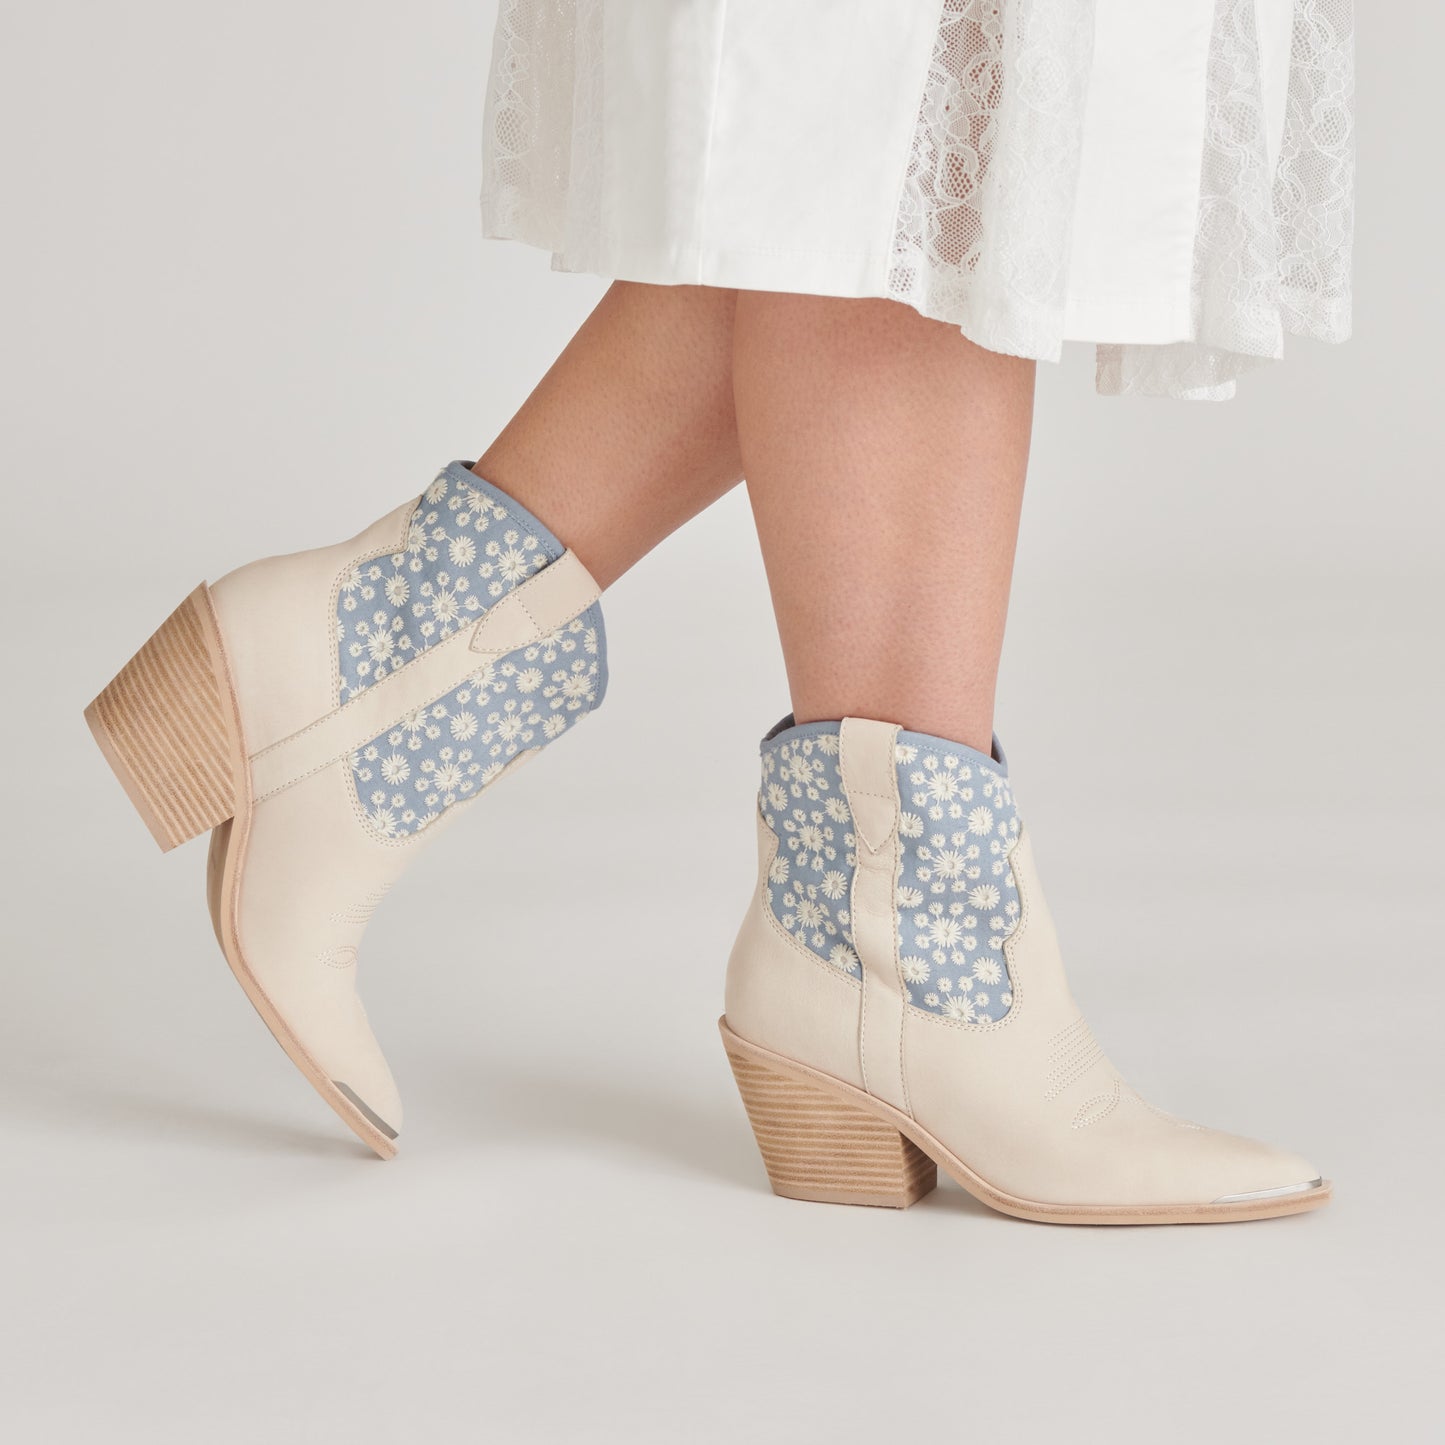 NASHE BOOTIES BLUE FLORAL NUBUCK